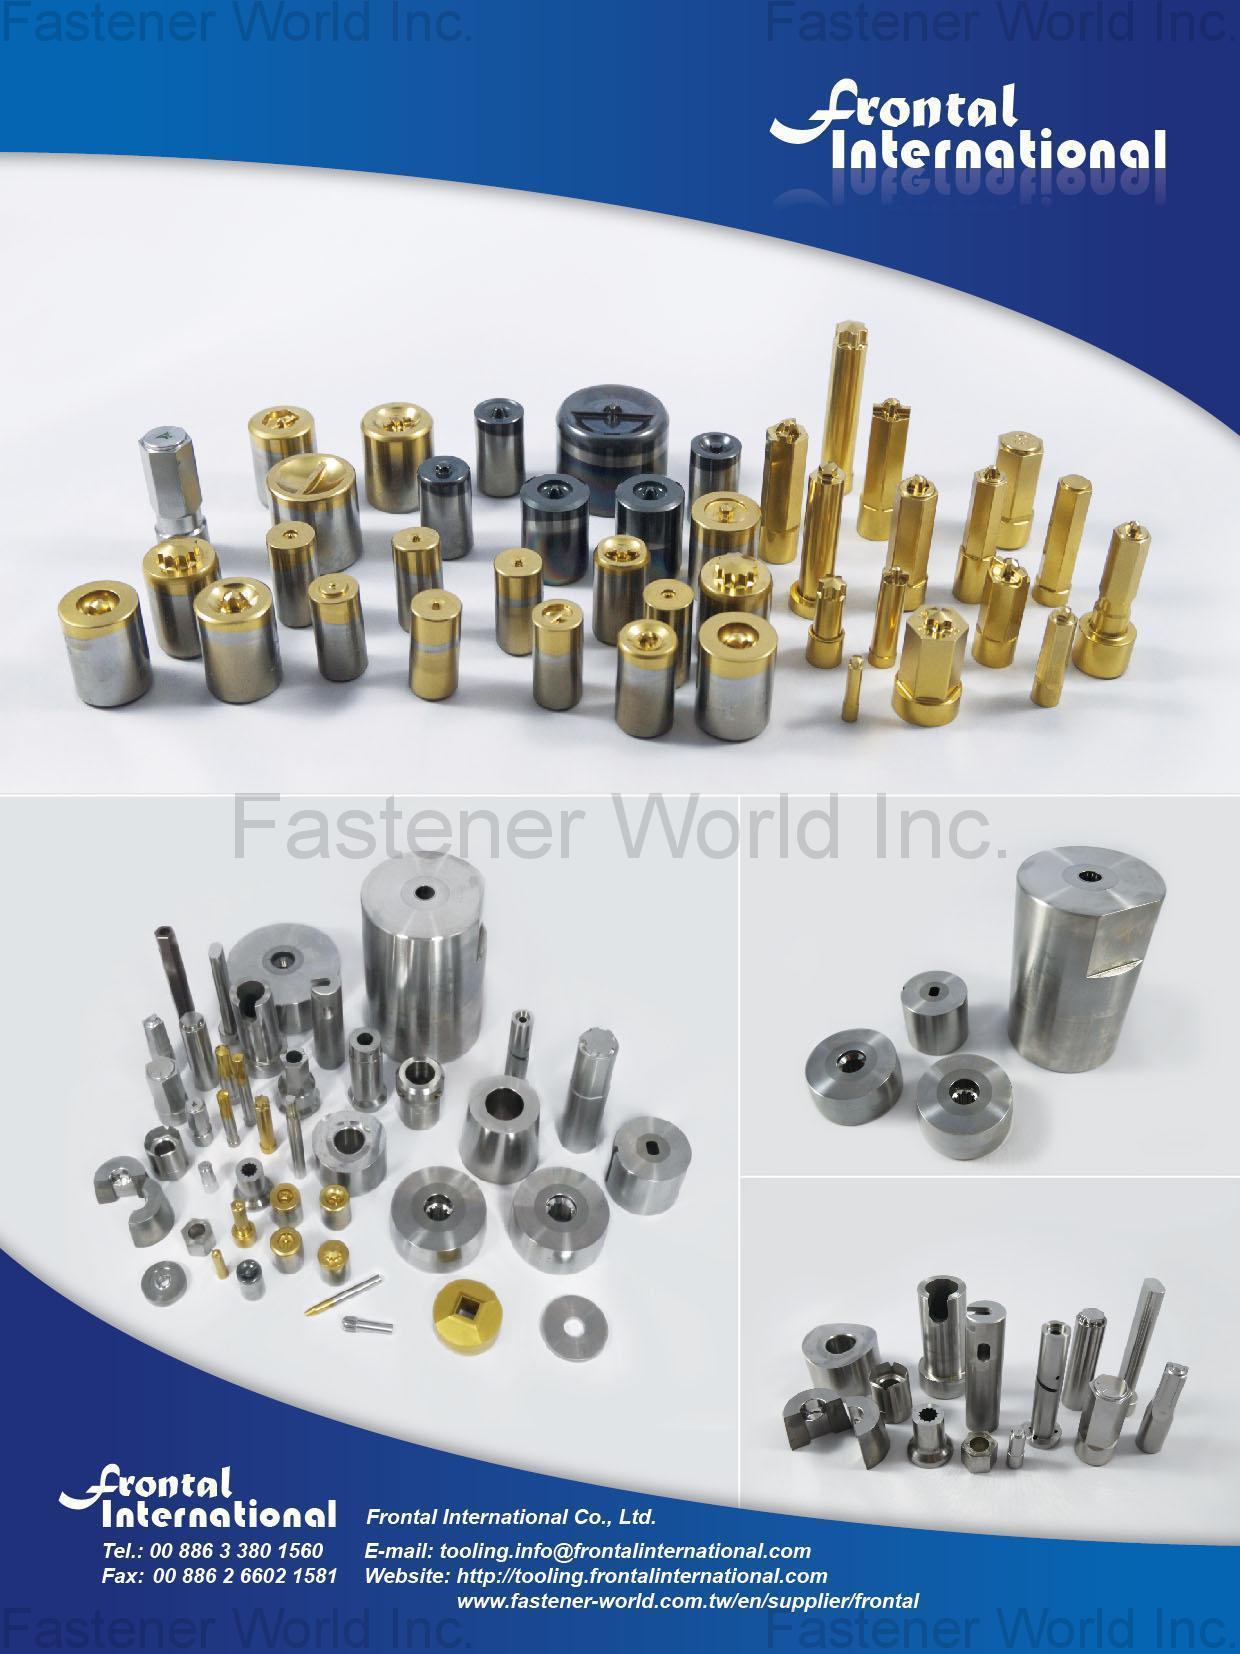 FRONTAL INTERNATIONAL CO., LTD. , feed rollers, cut-off knives, transport fingers, punches, carbide matrixes, recess punches, inserts, holders, pins, casings, carbide quills, thread rolling dies, thread rollers and trimming dies , Molds & Dies